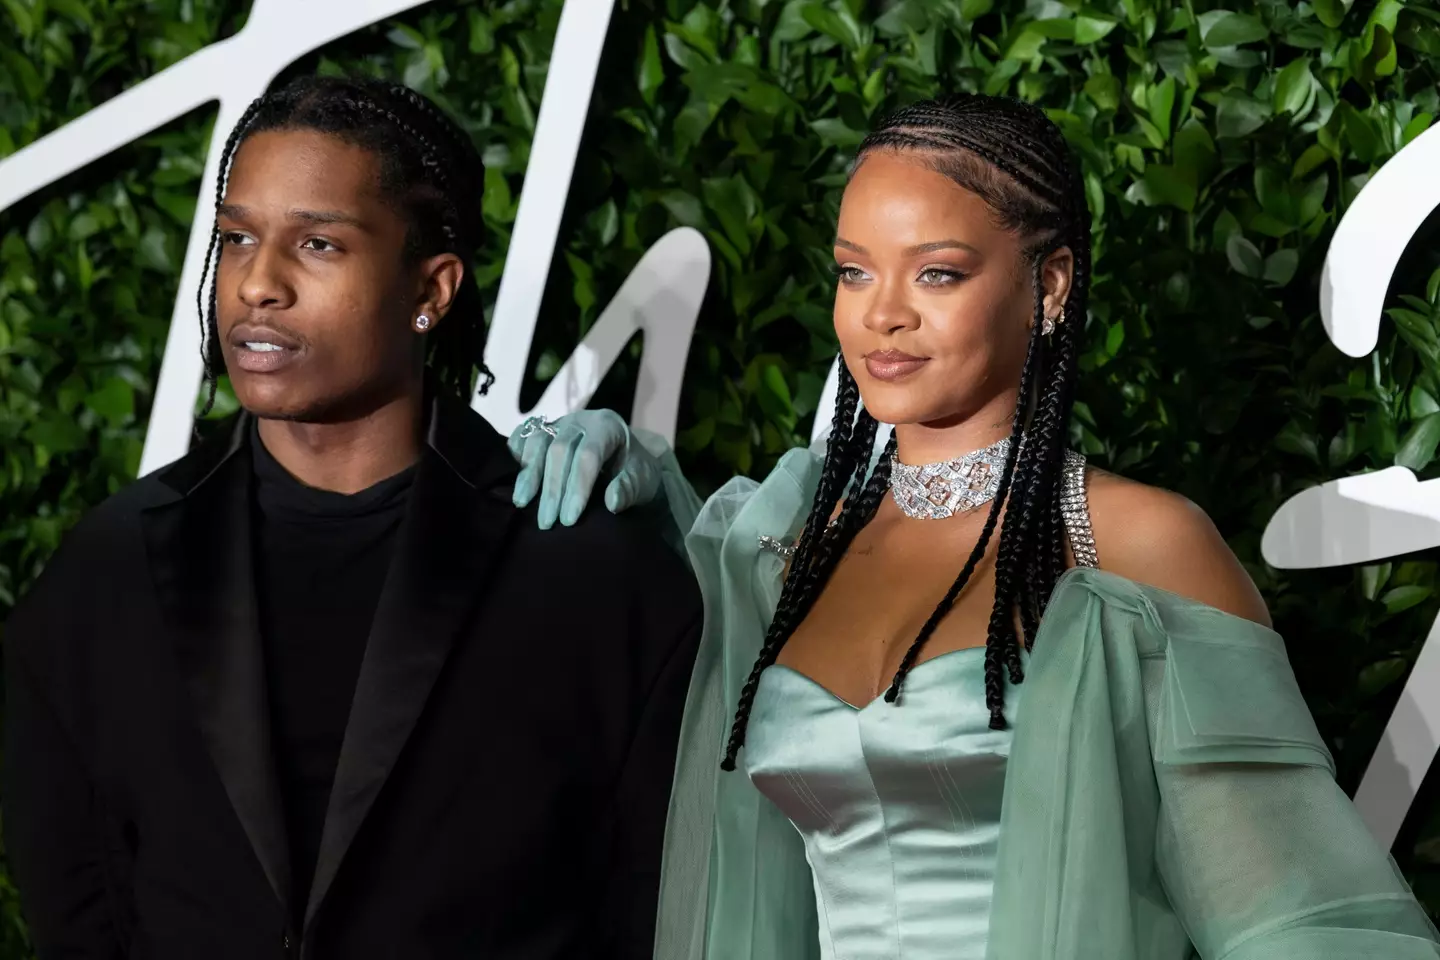 A$AP Rocky and Rihanna began dating in 2020.